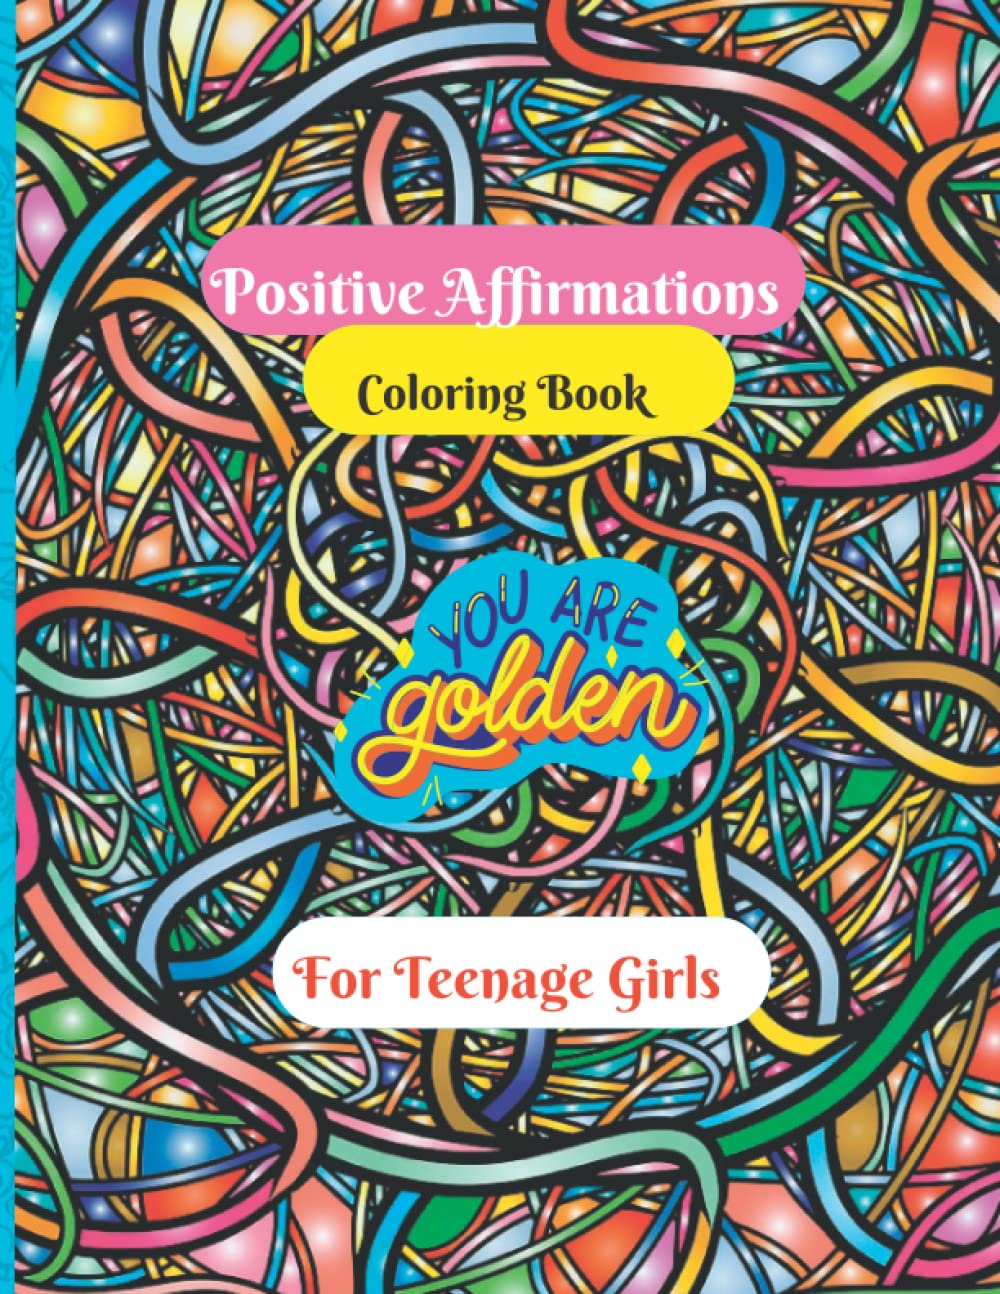 Positive Affirmations Coloring Book For Teen Girls: A Self-Awareness & Emotional Wellbeing Coloring Book For Teens Ages 11-16, 50 Unique Quotes & Positivity Coloring Book $6.2